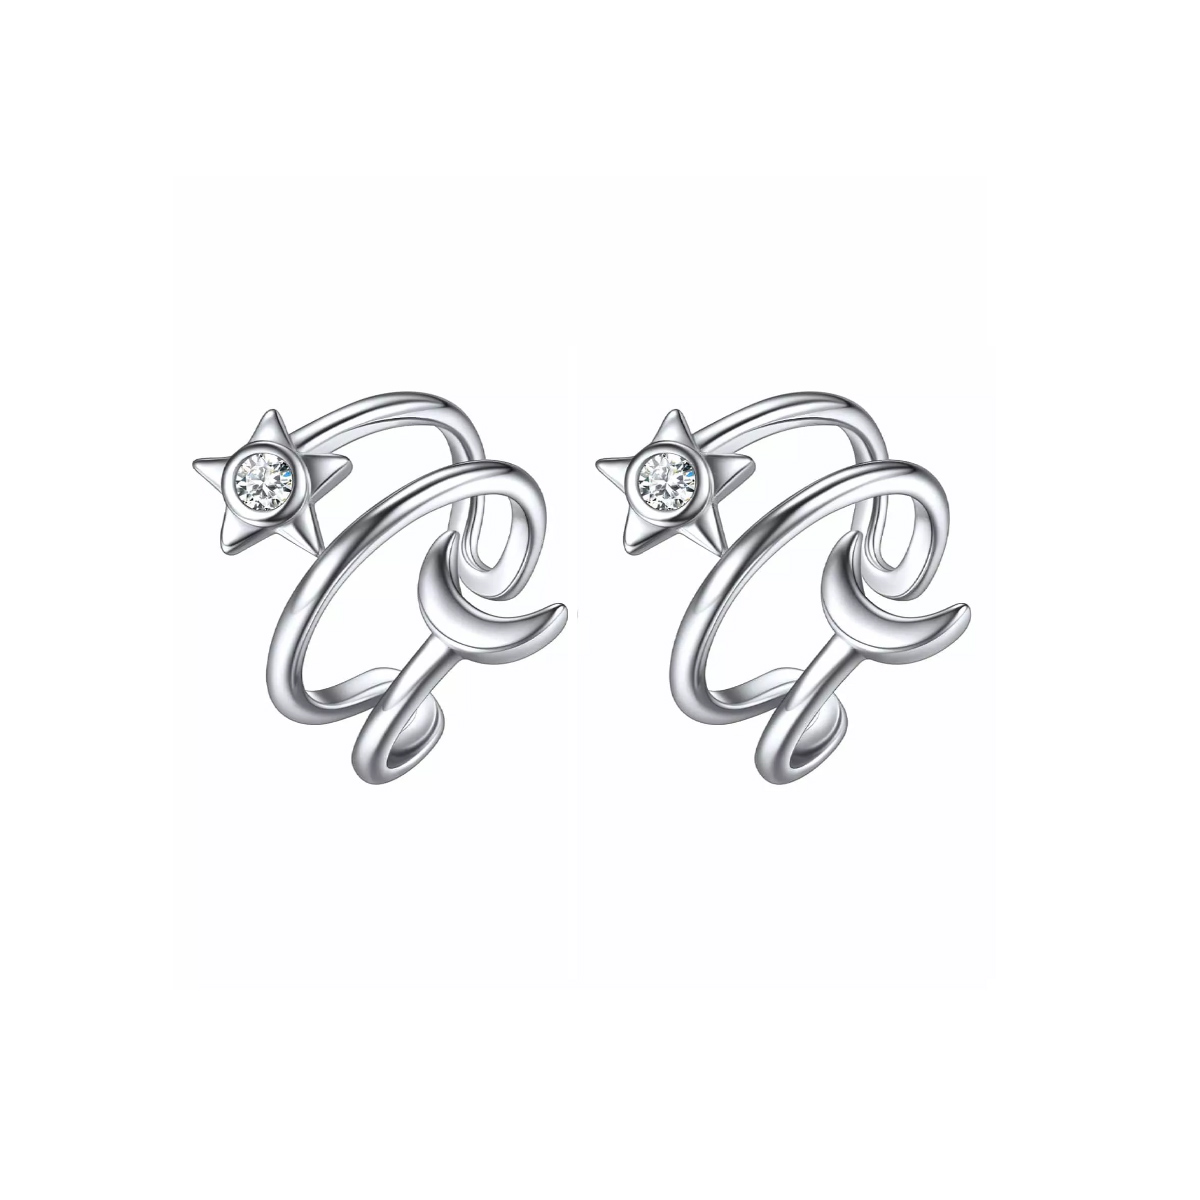 ChicSilver 925 Sterling Silver Moon And Star Ear Cuff Earrings For Women